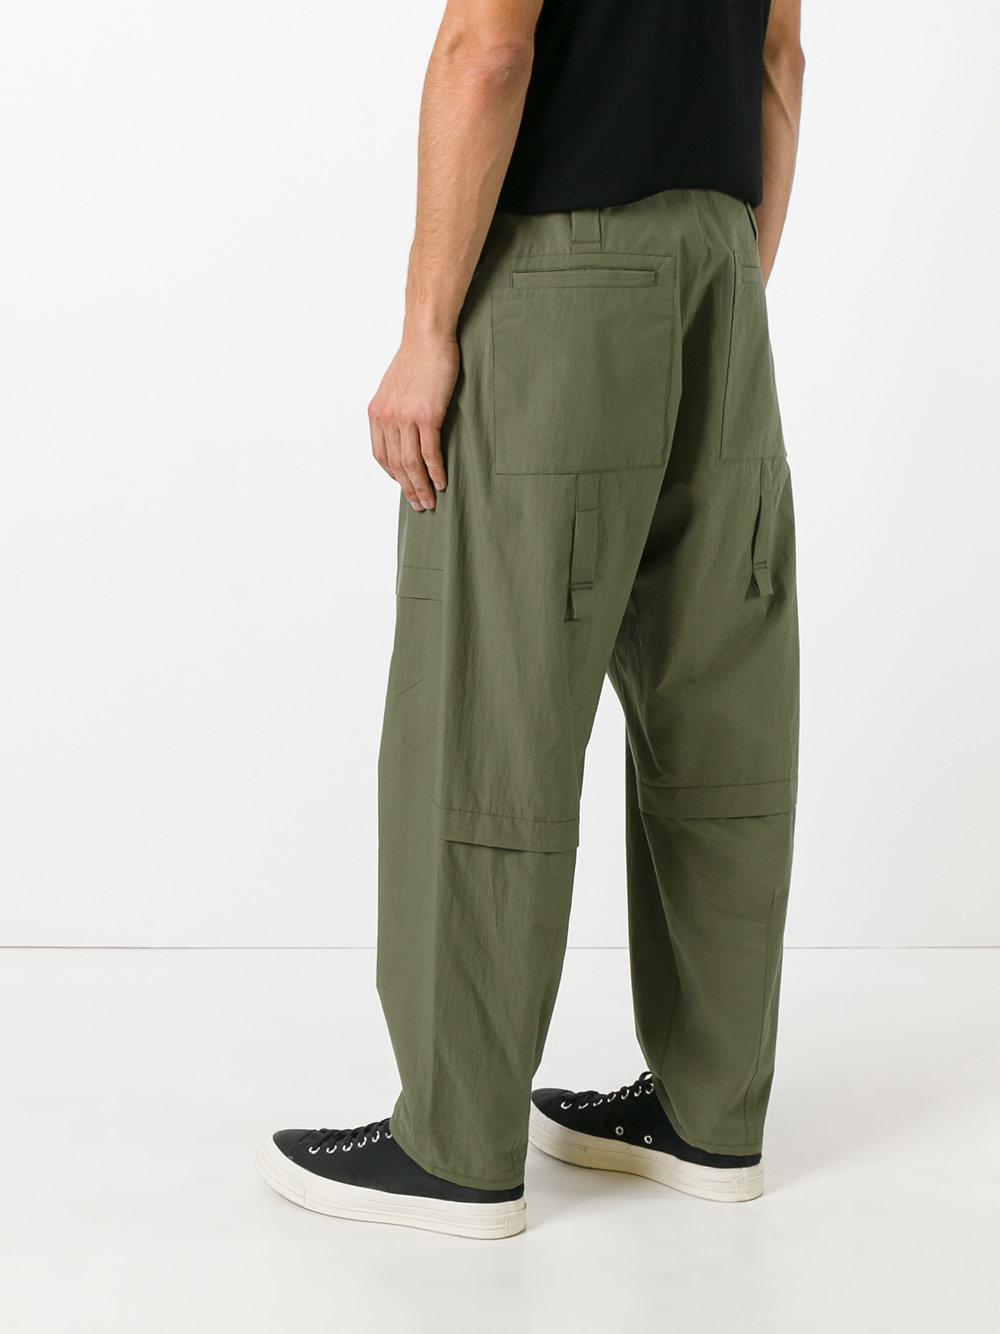 OAMC Cotton Combat Trousers in Green for Men - Lyst